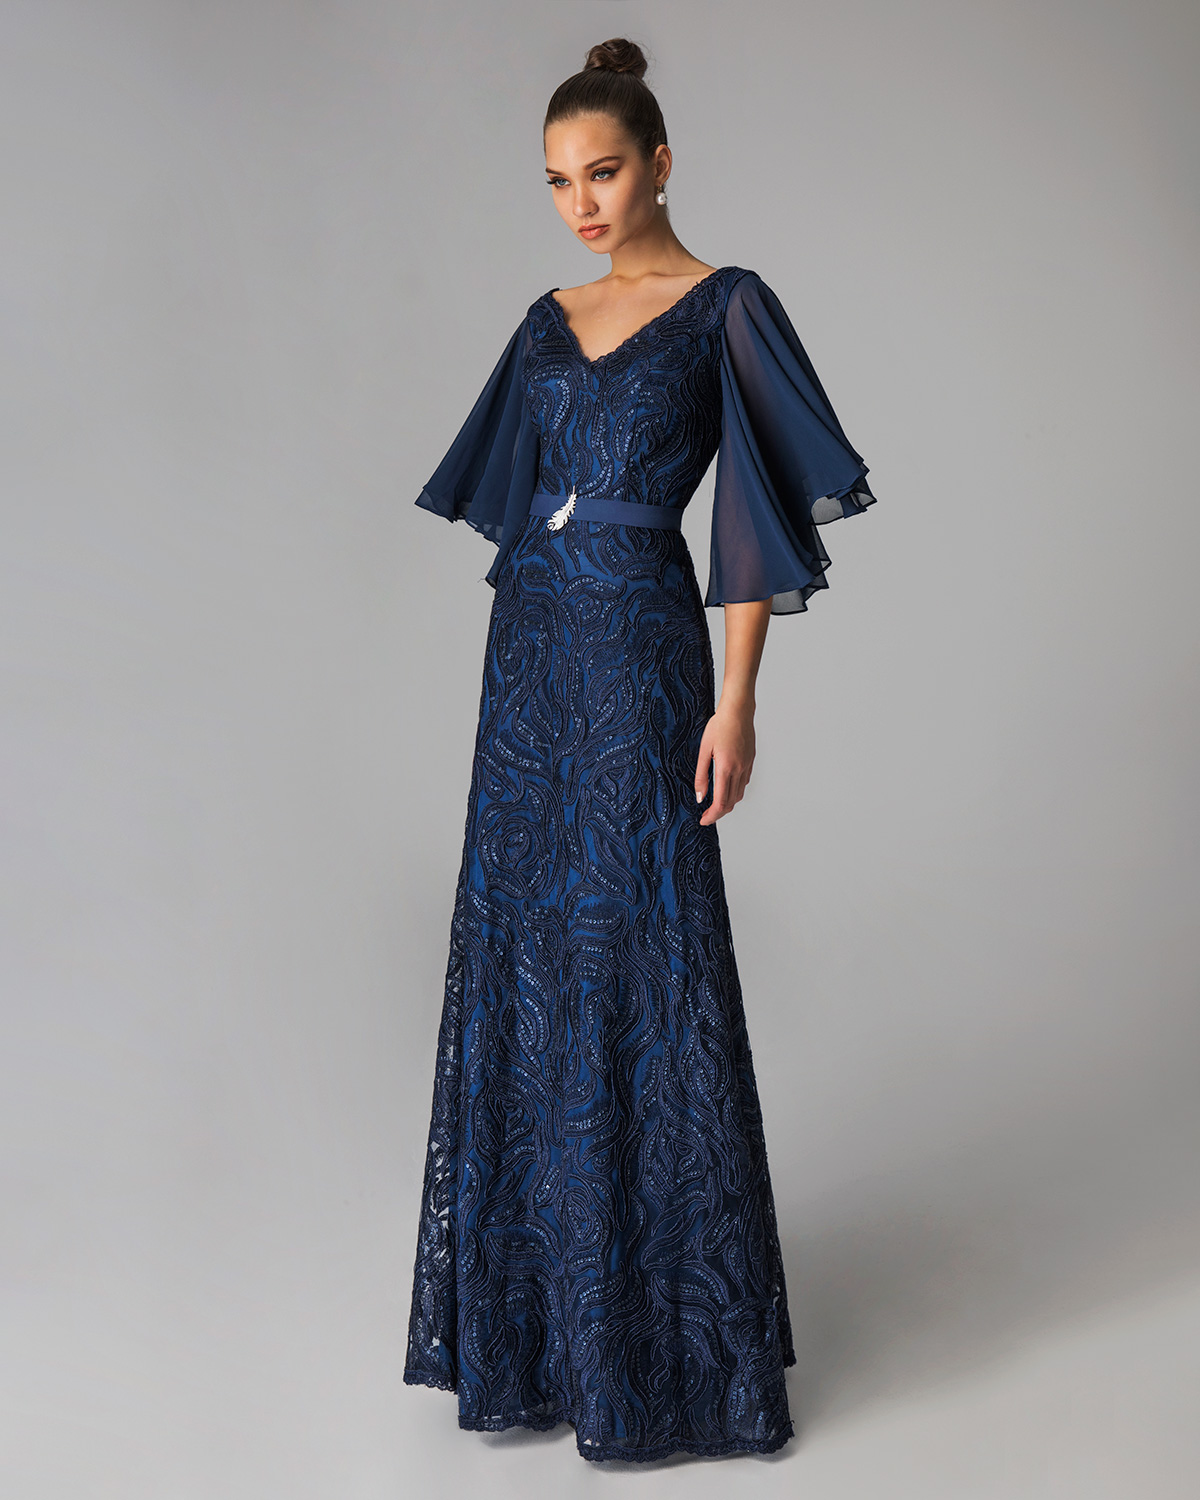 Classic Dresses / Long evening  lace dress for mother of the bride with sleeves of chiffon